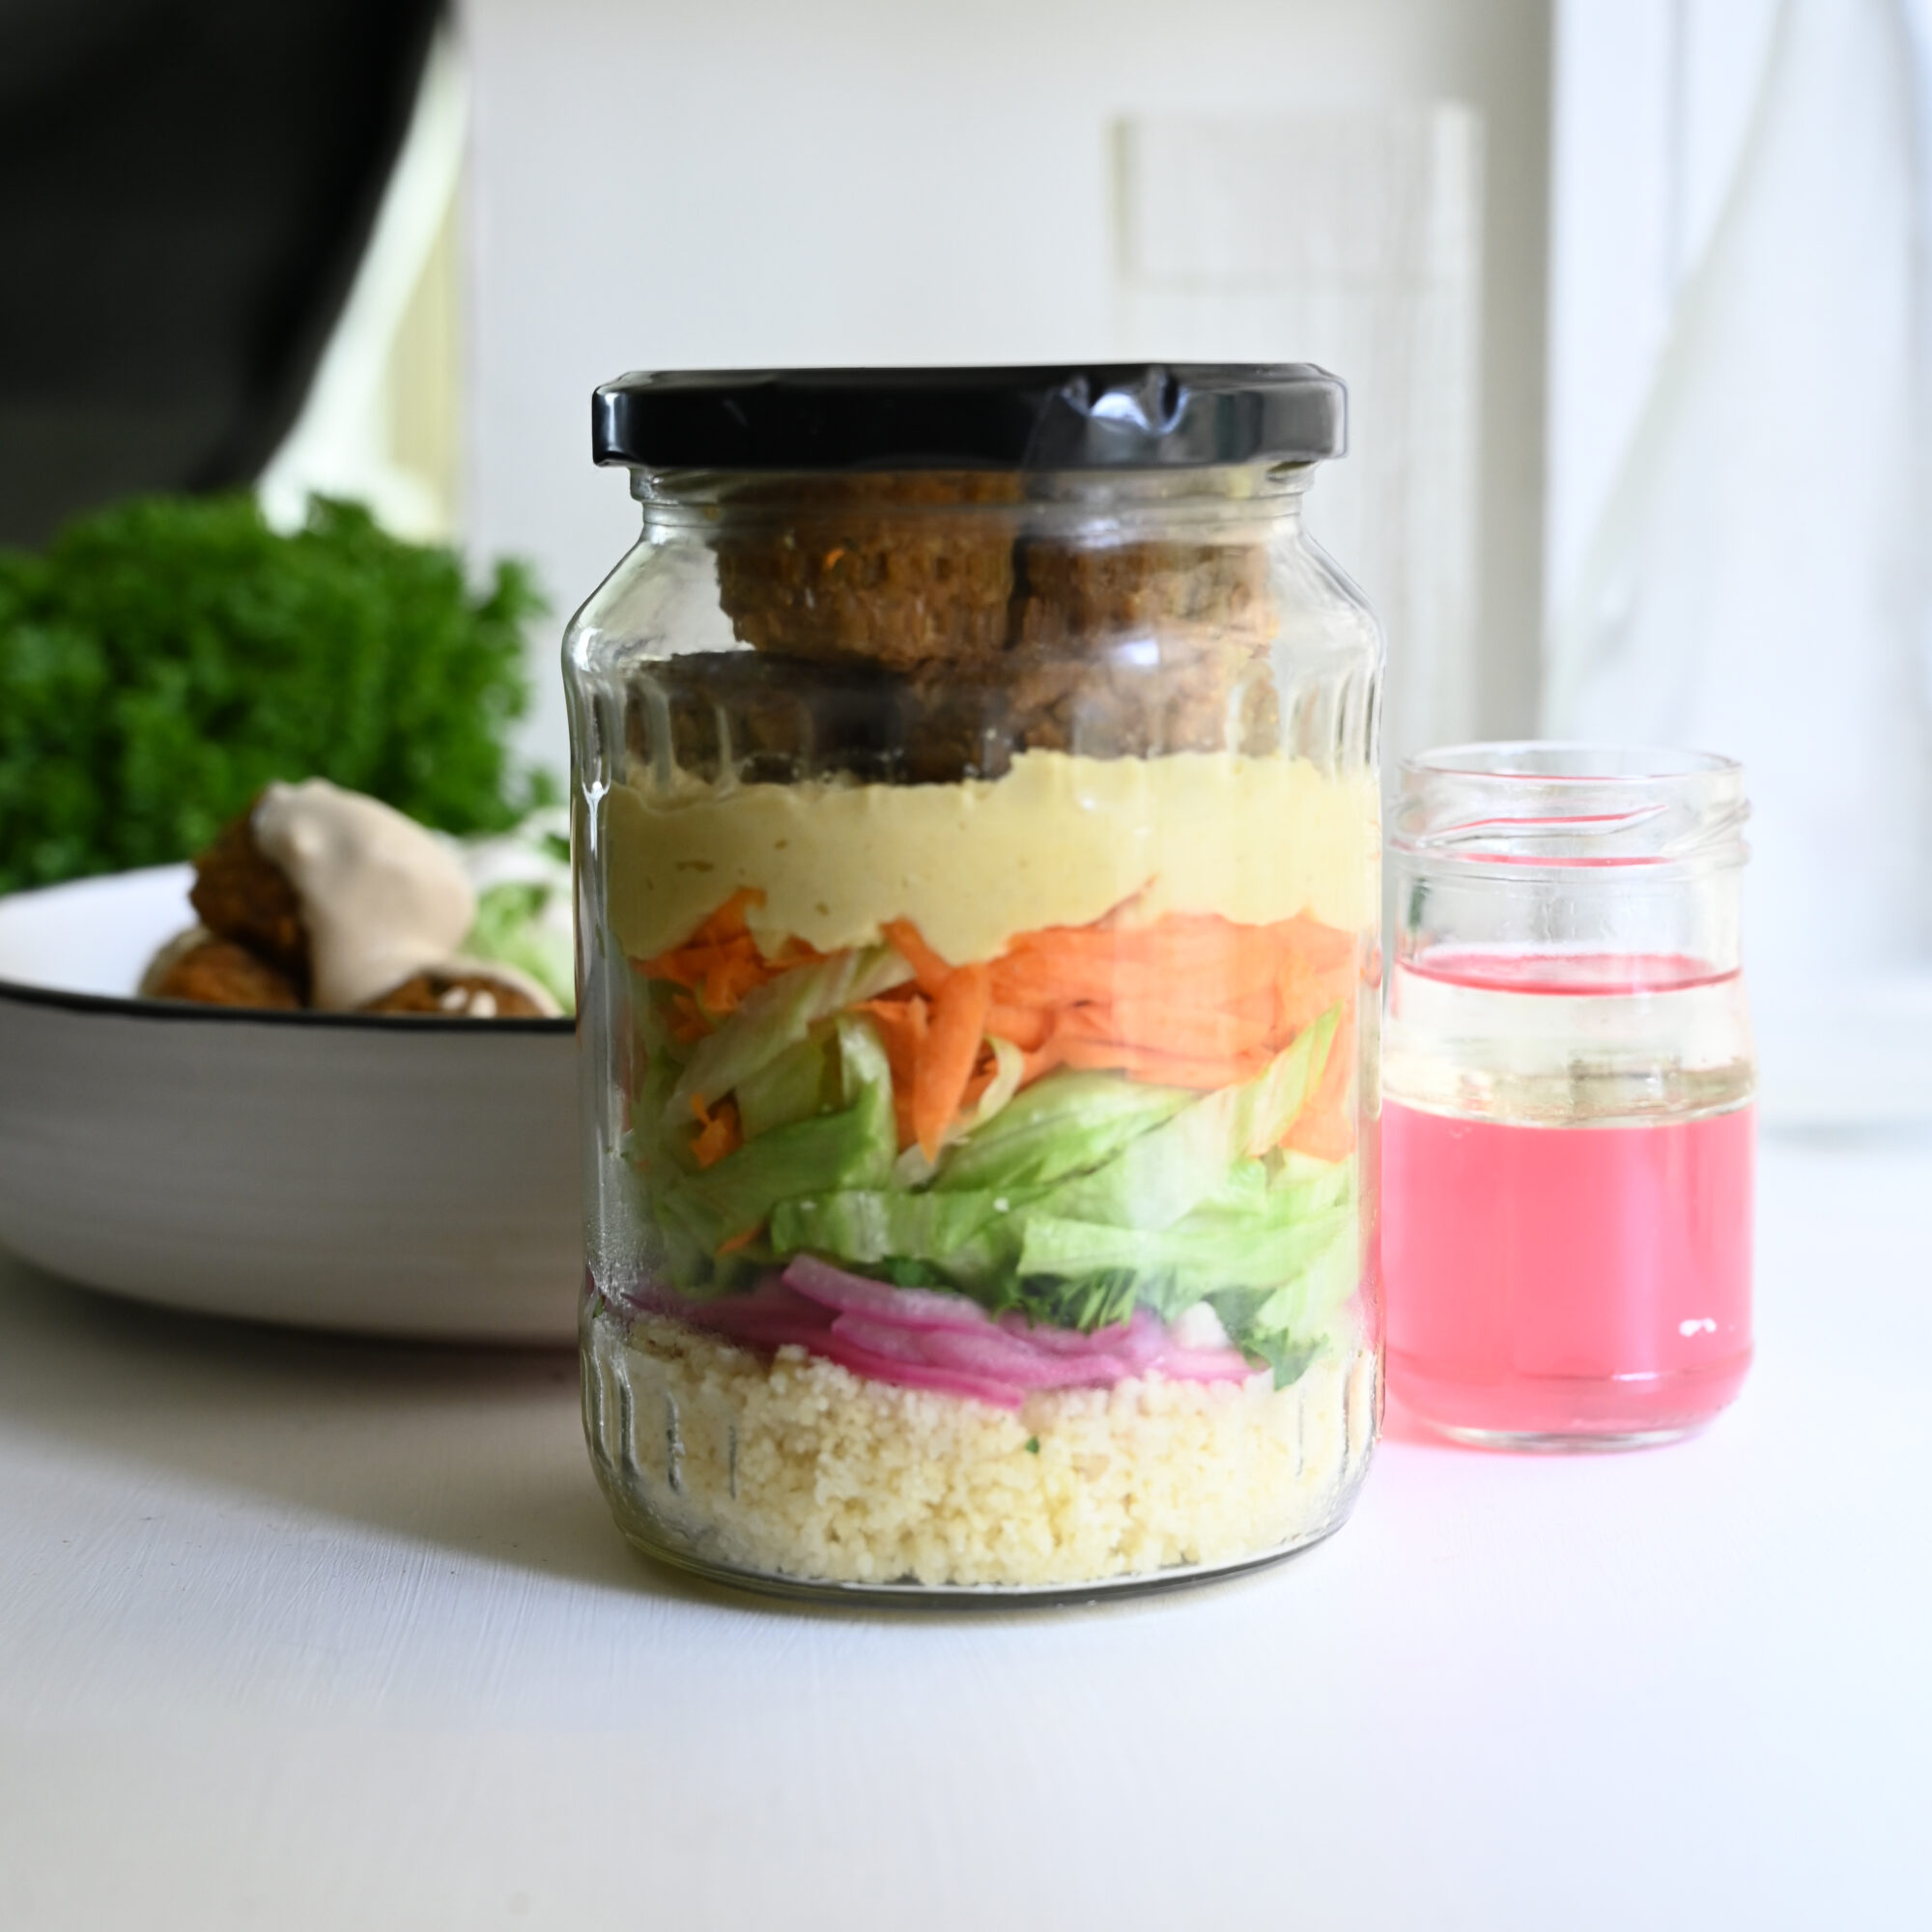 Falafel and couscous layered in a jar